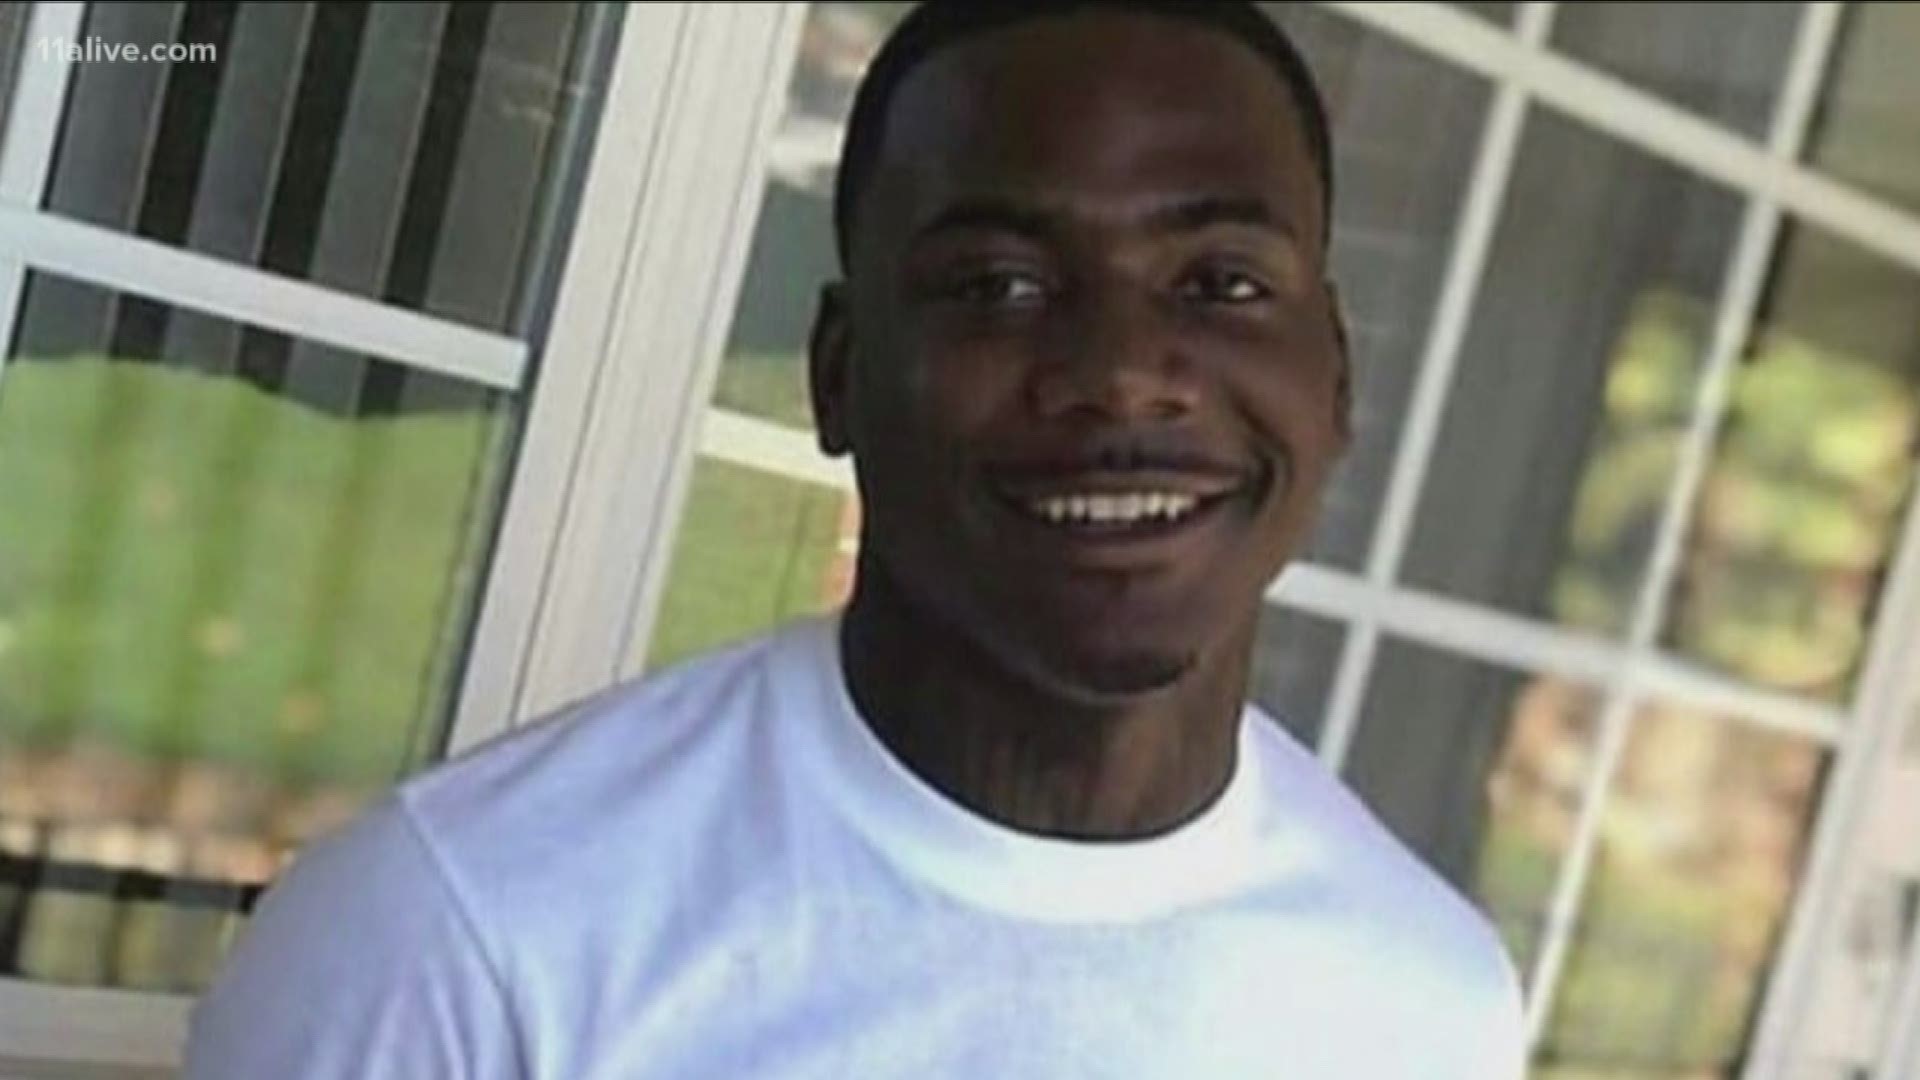 There are still no answers yet in the officer-involved shooting that resulted in the death of 21-year-old Jimmy Atchison.